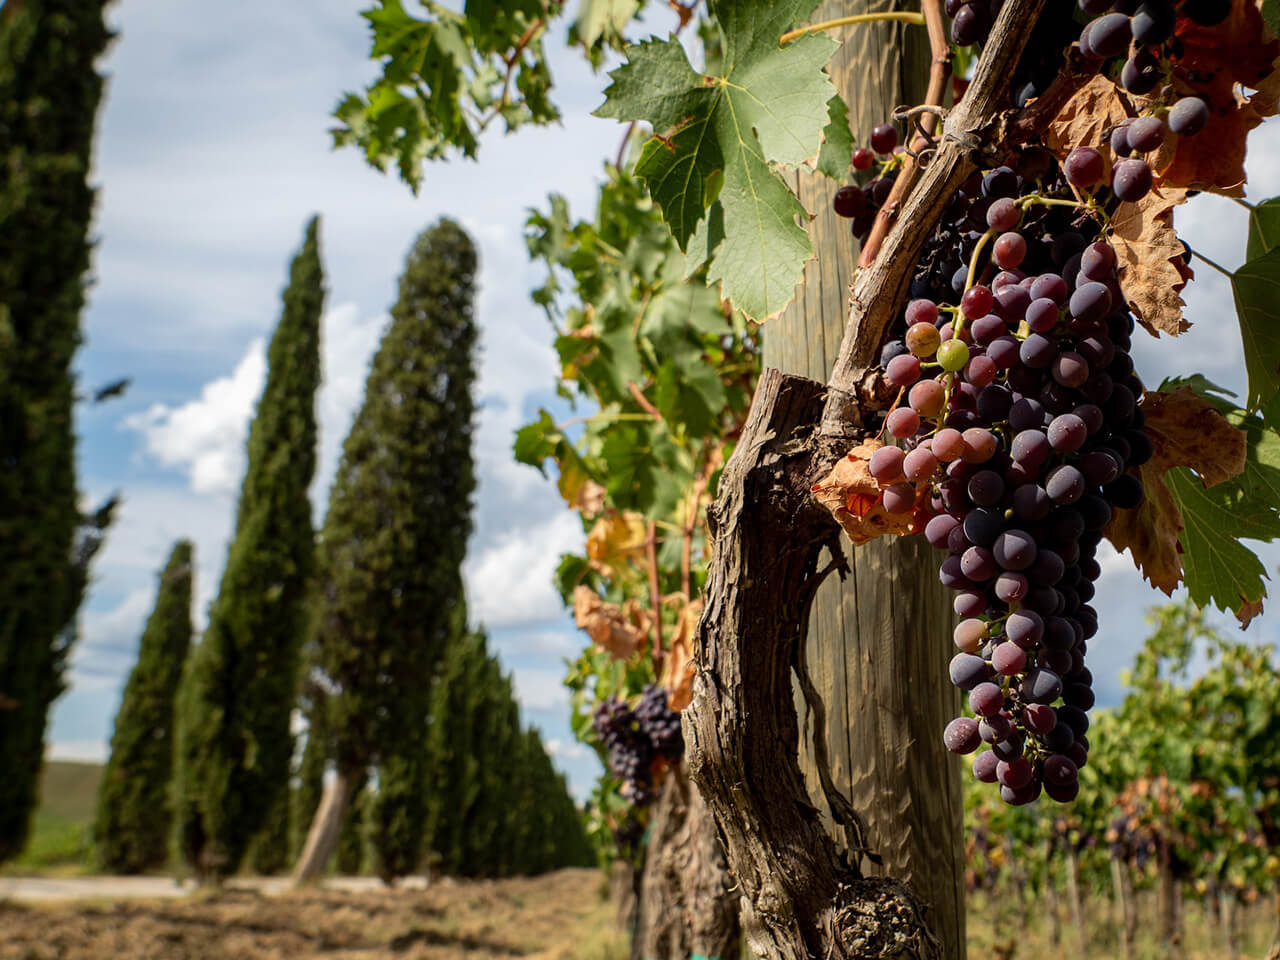 In Tuscany, September is the time for harvest and wine festivals